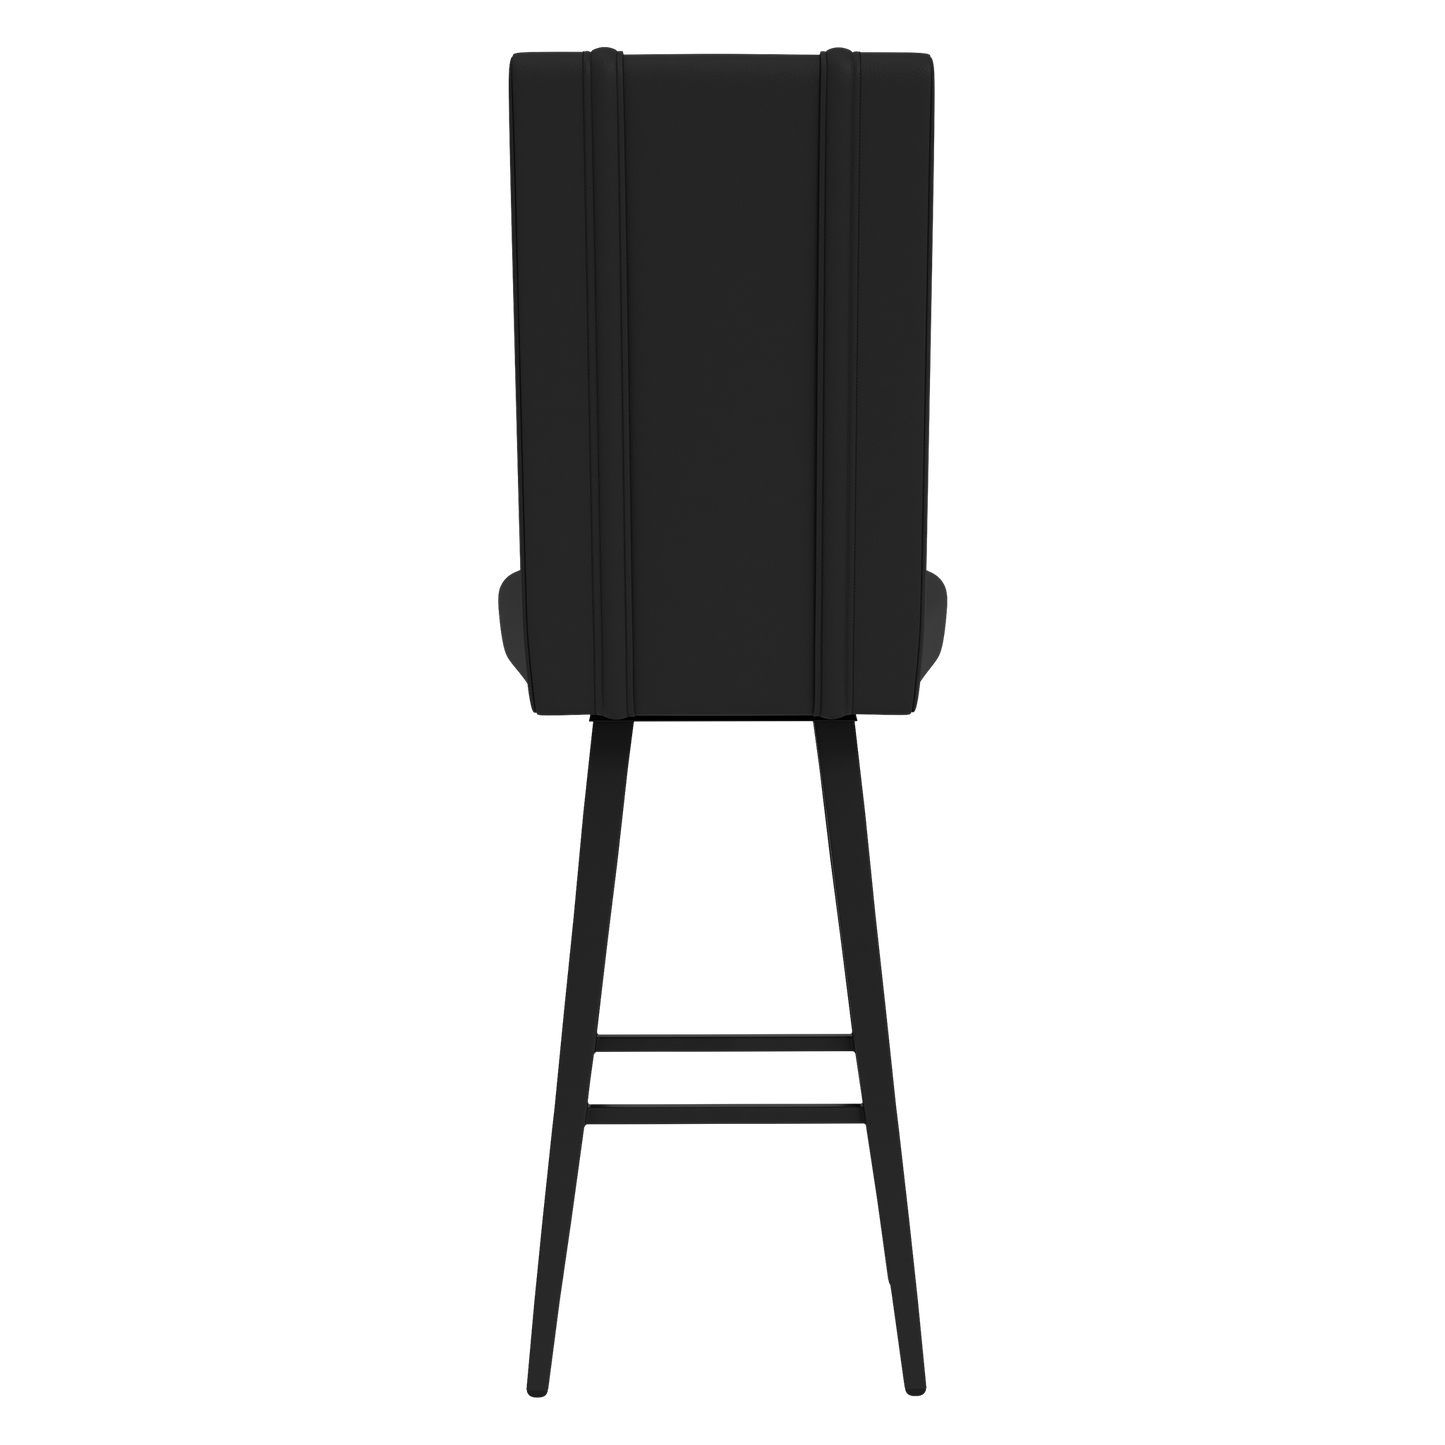 Swivel Bar Stool 2000 with Vegas Golden Knights with Secondary Logo